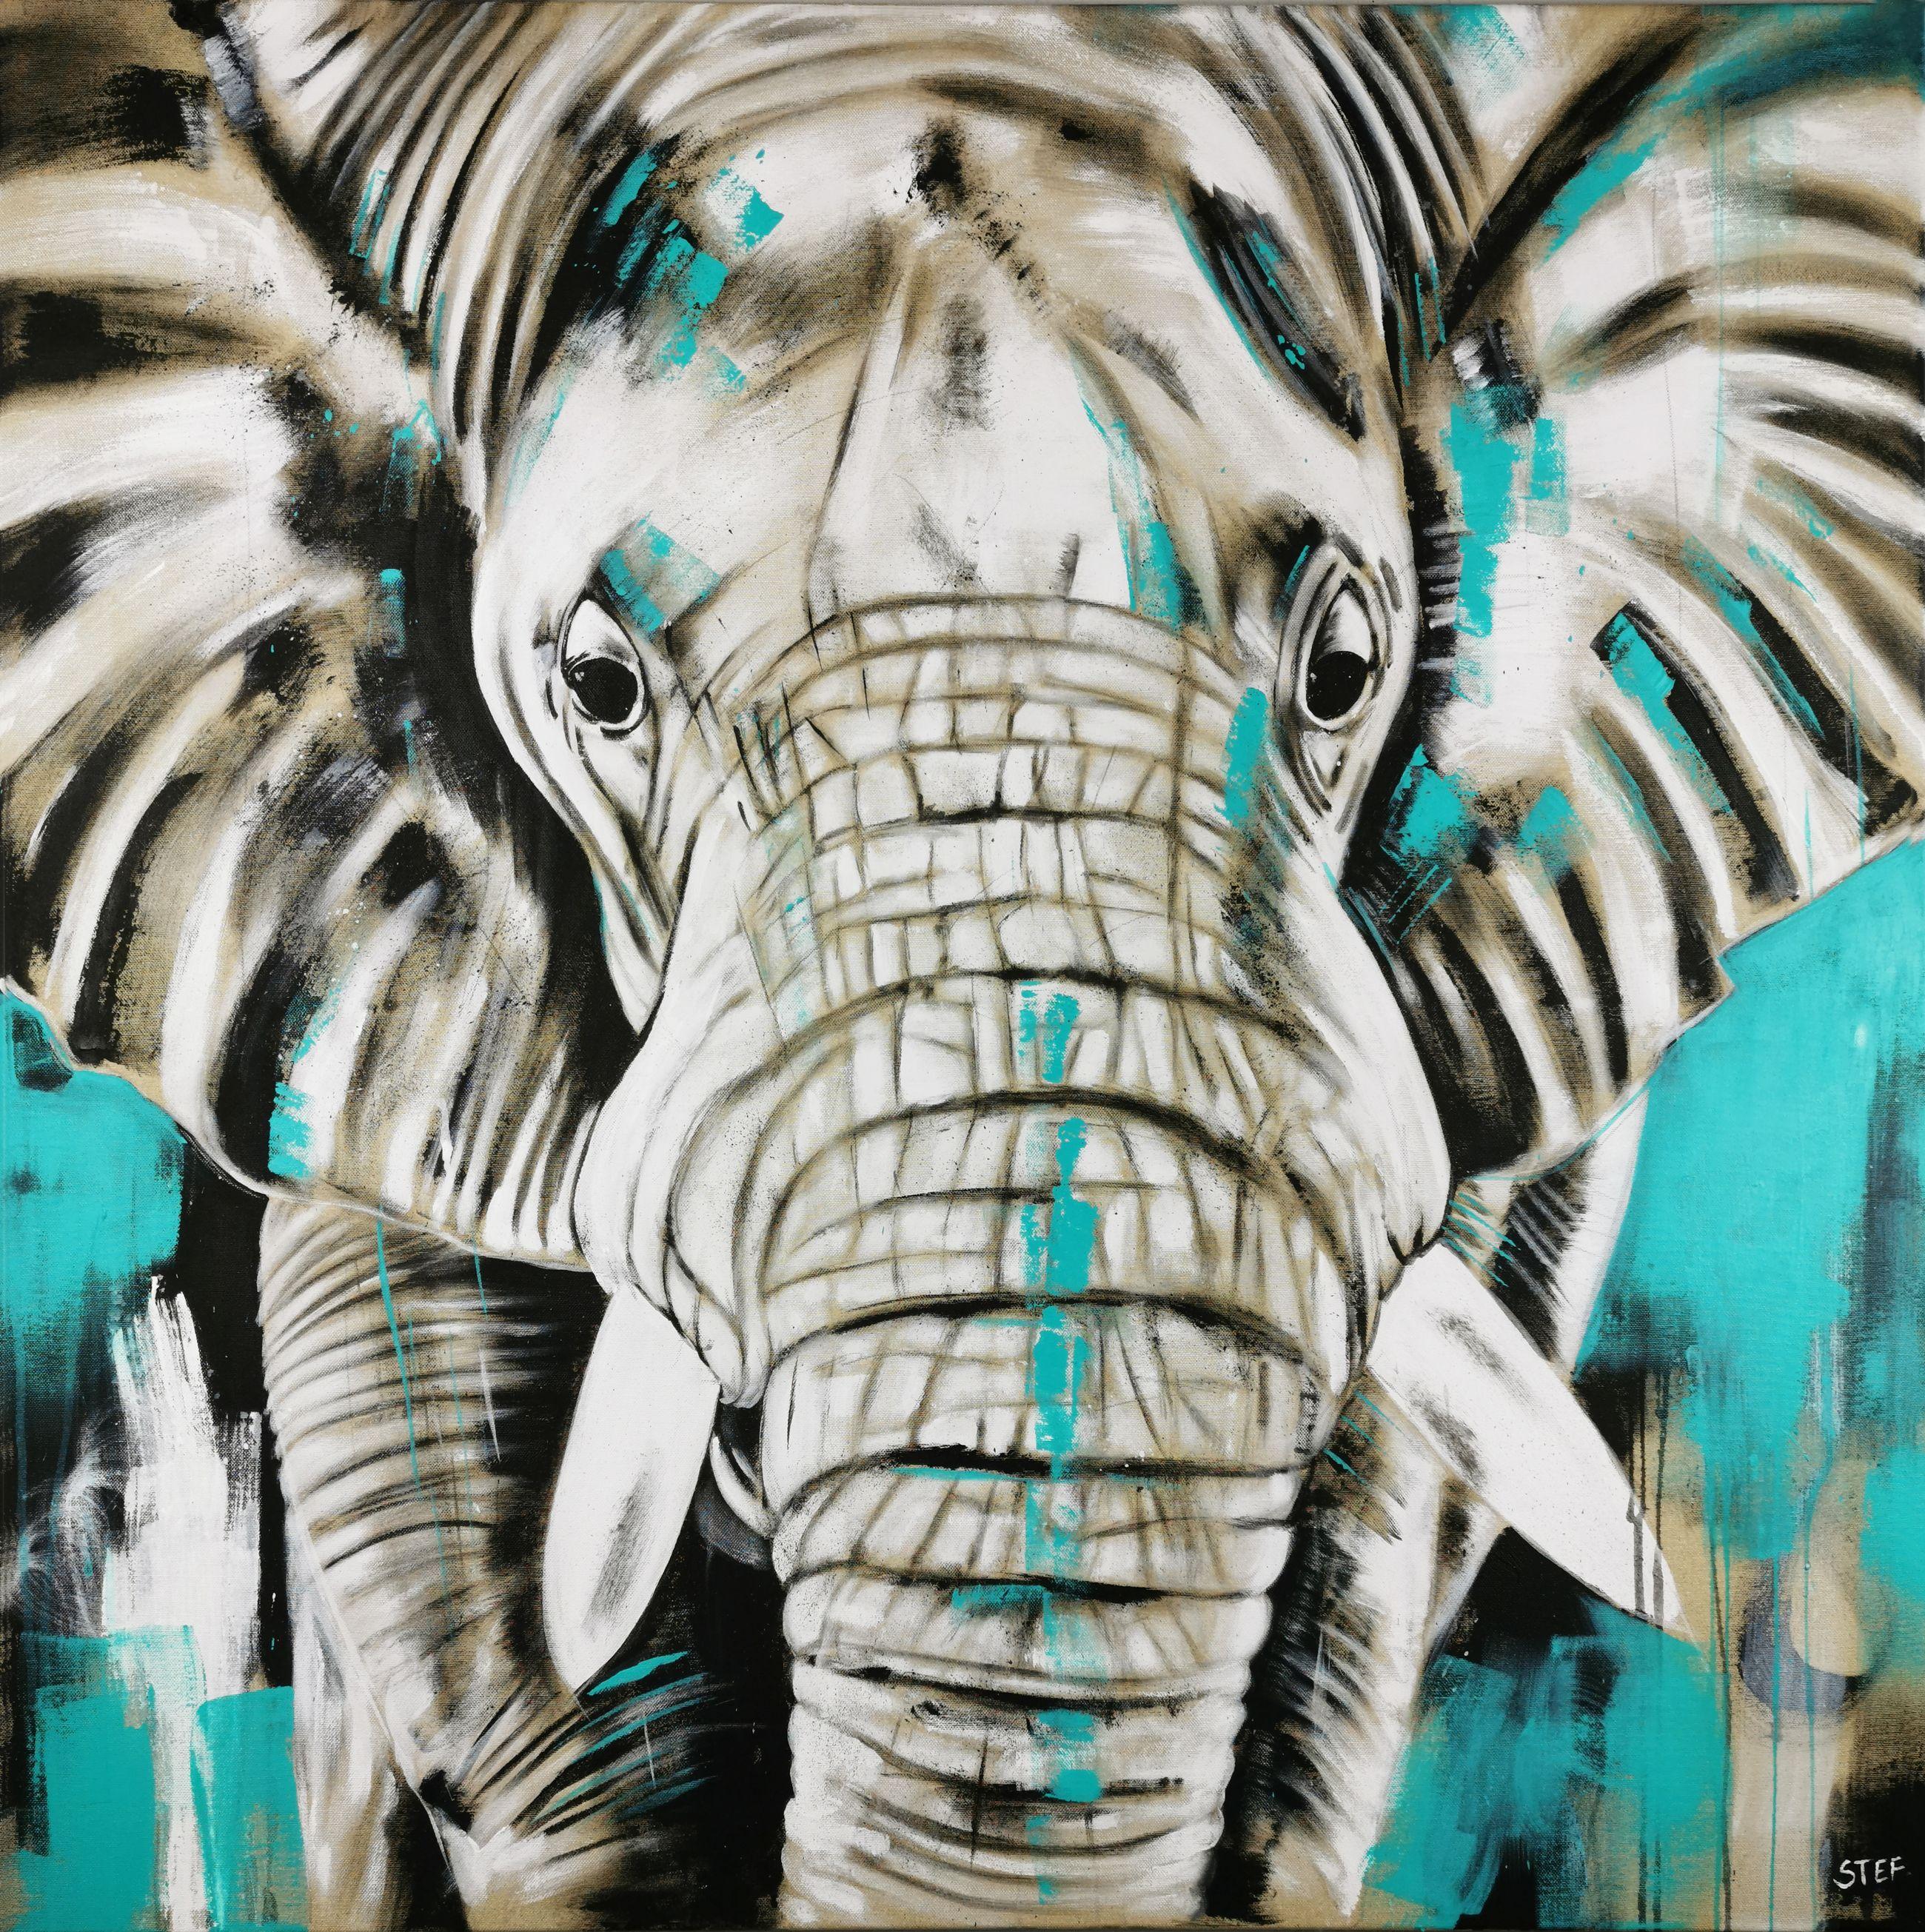 ELEPHANT #24 is an expressive painting of a close up elephant head.    Splashing Colors in black, white and tourquise on raw canvas.    100 x 100 cm    â€žNo one in the world needs an elephant tusk, but an elephant.â€  This work is created in the